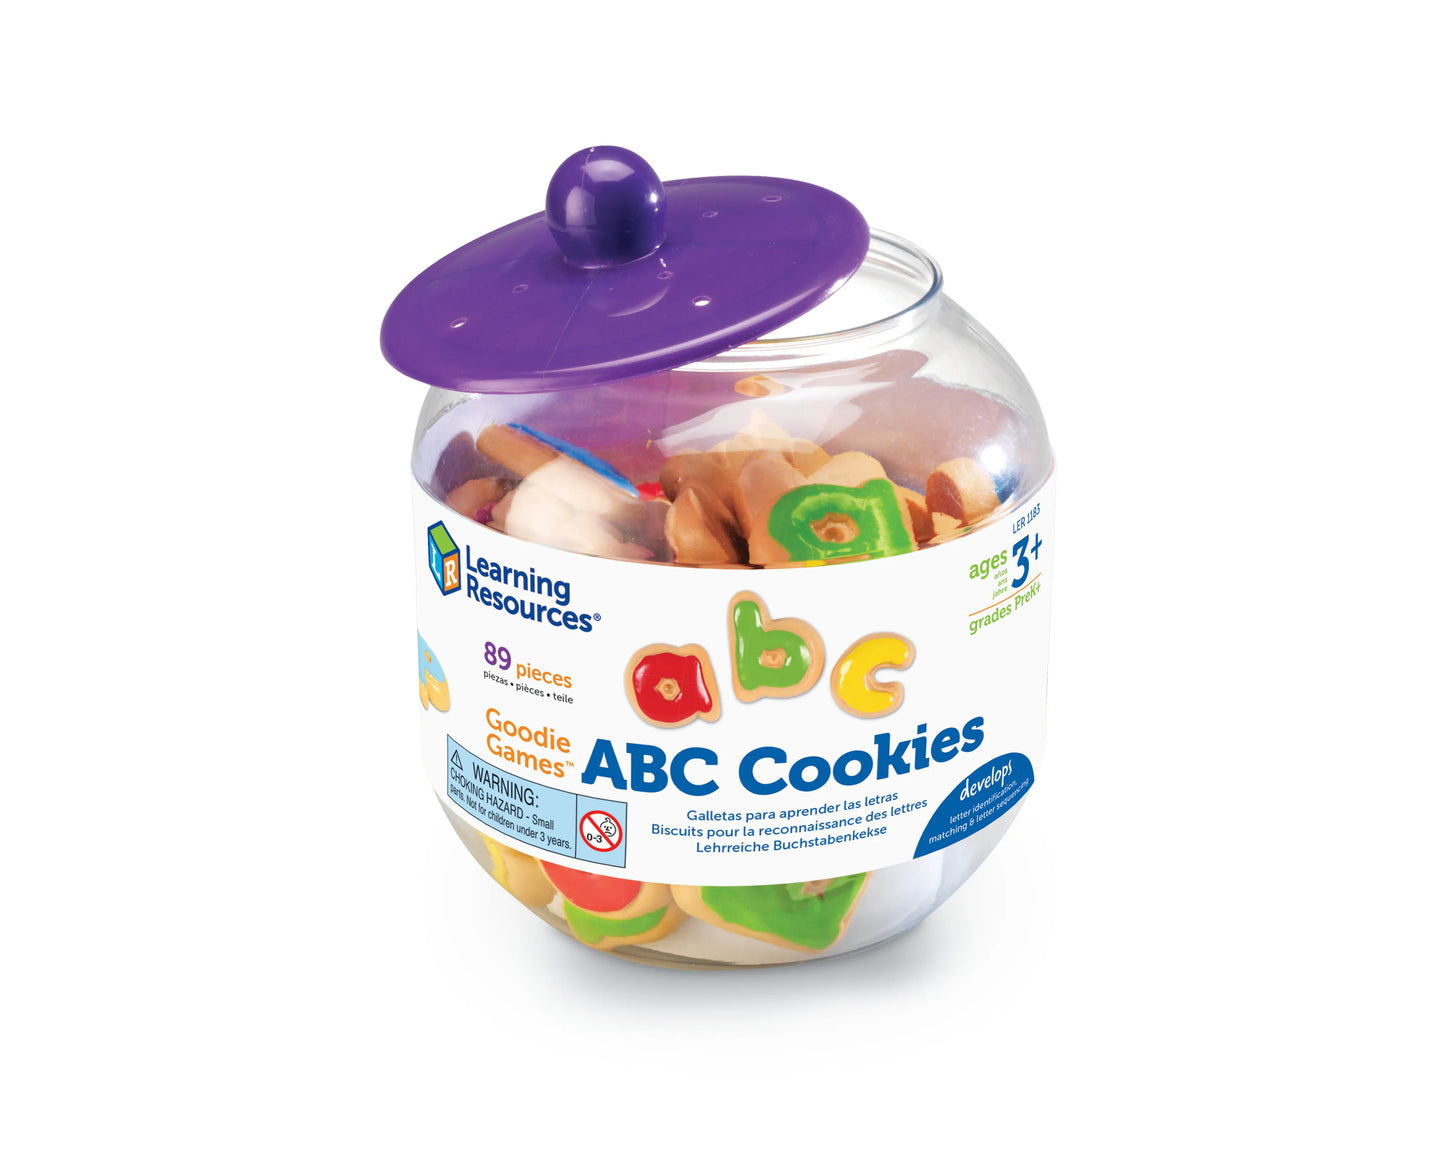 Learning Resources Goodie Games ABC Cookies